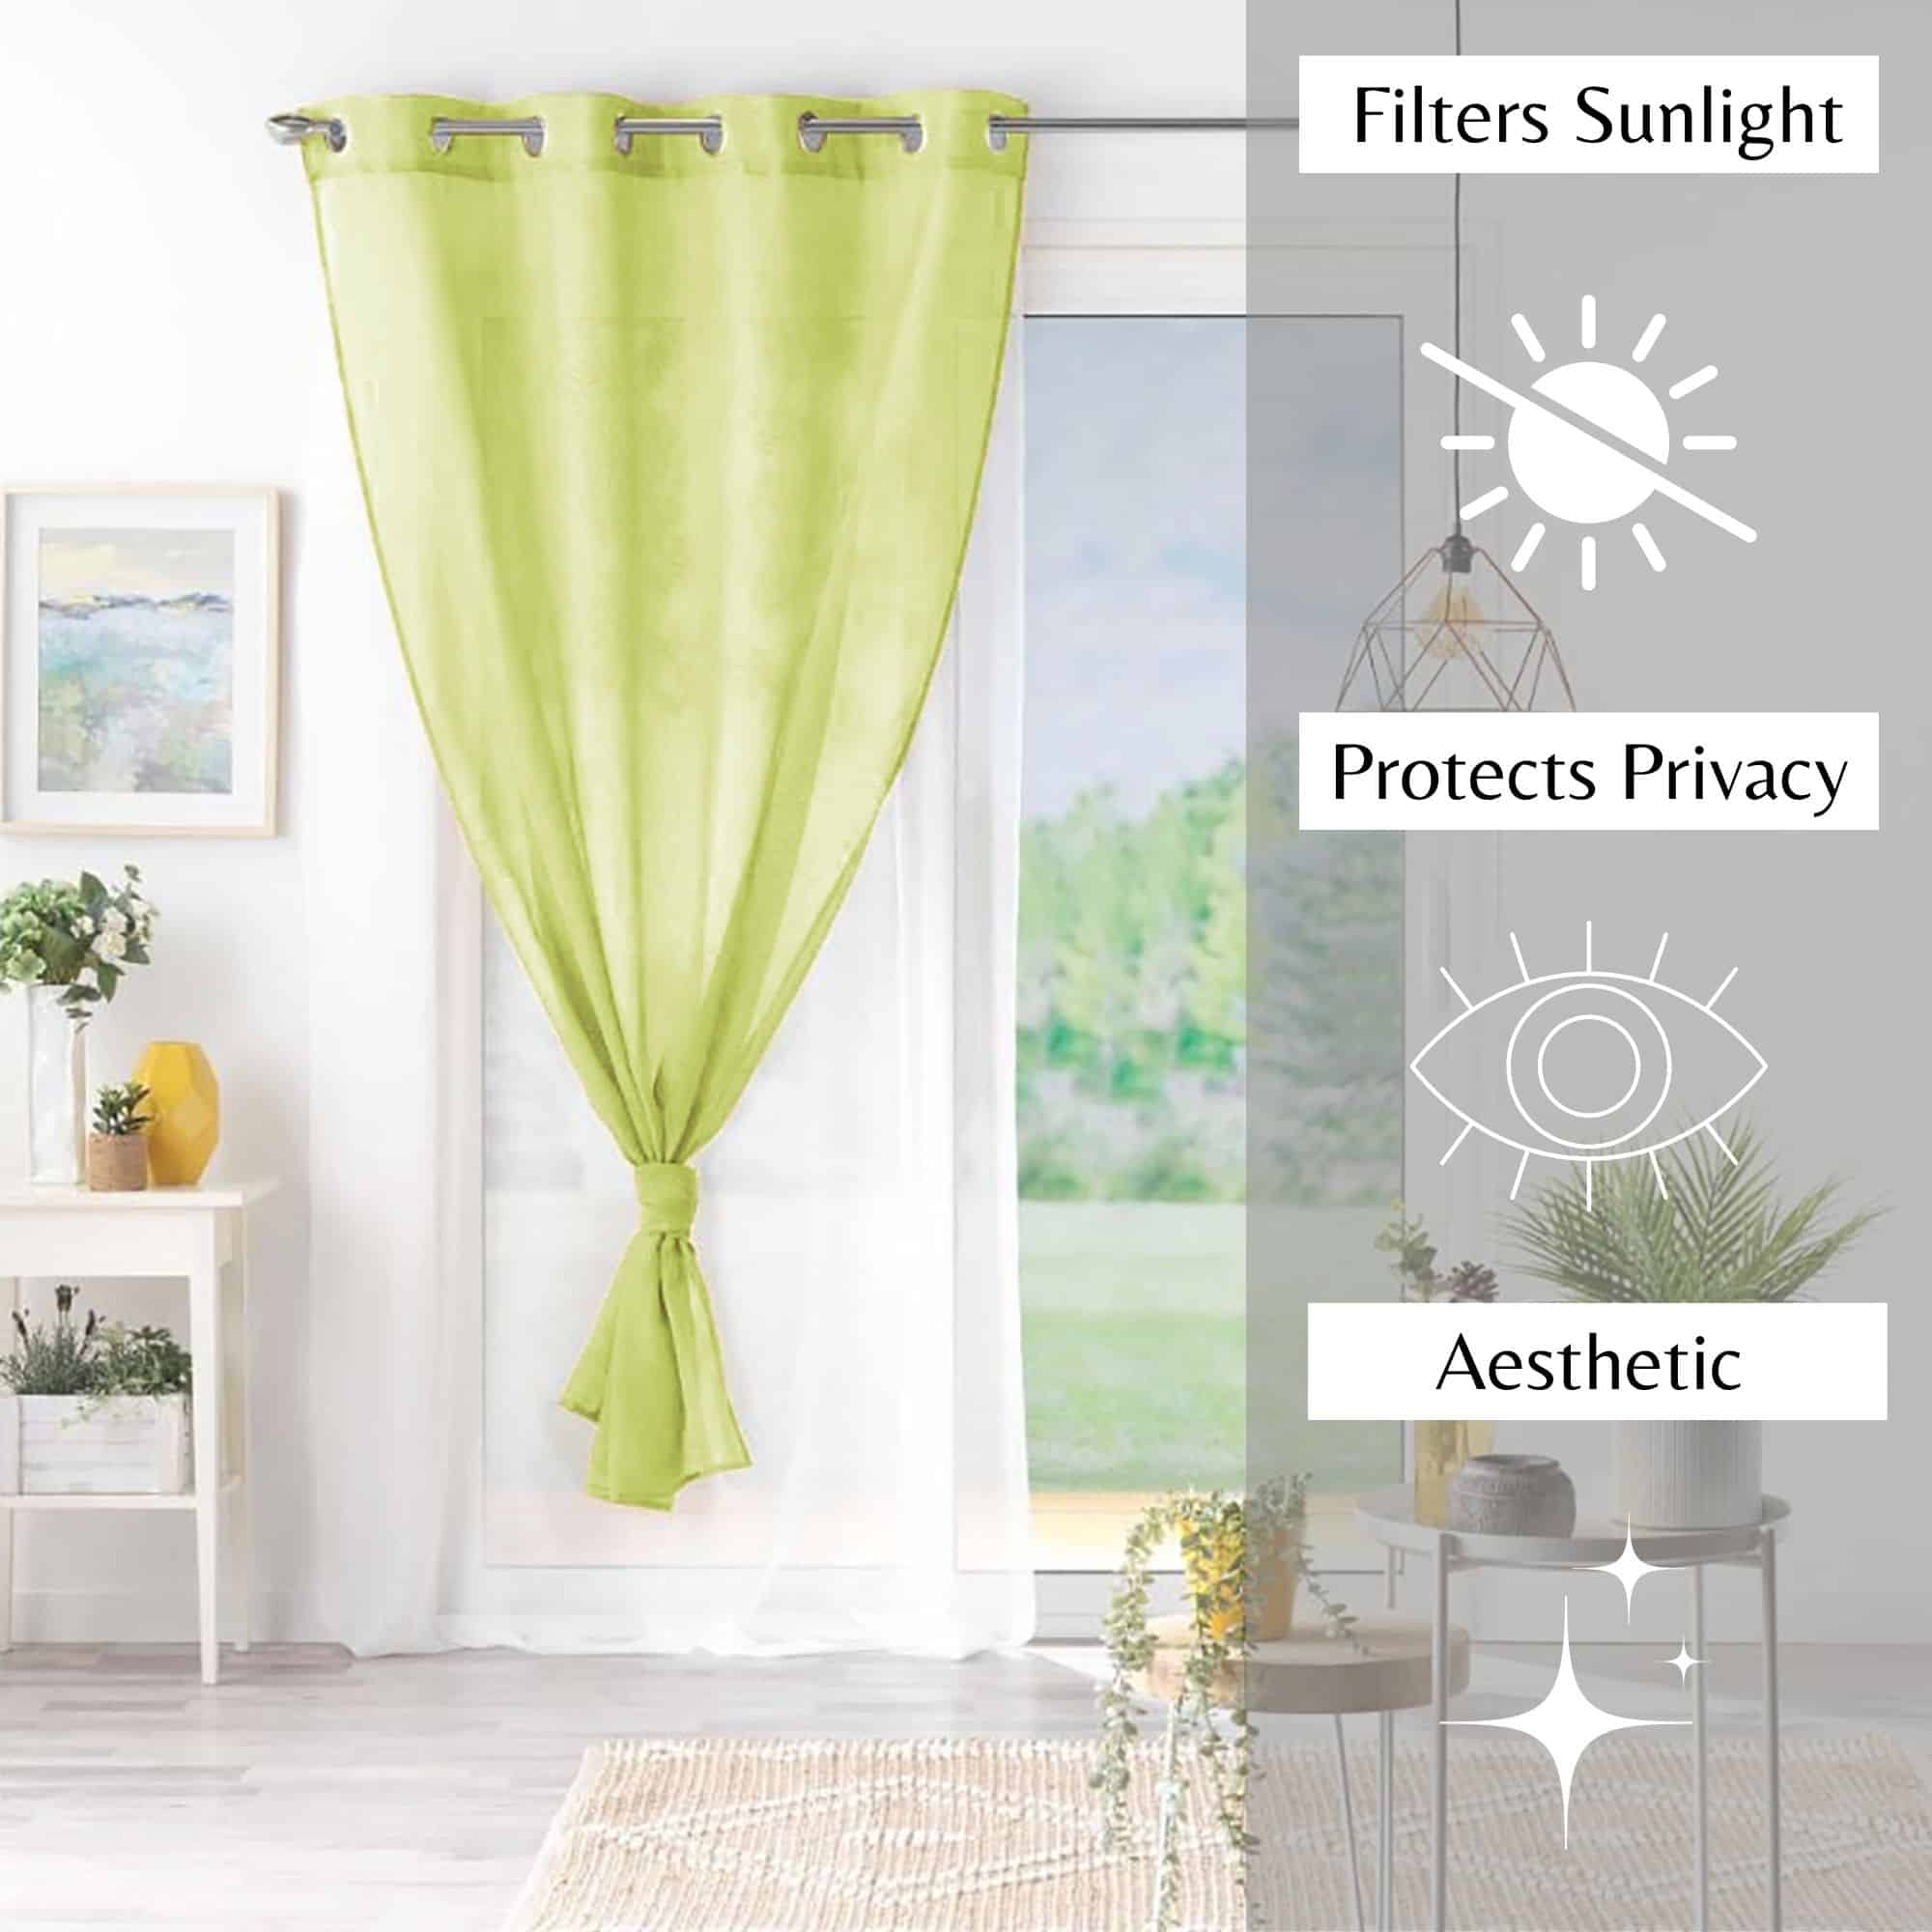 filters sunlight protects privacy aesthetic lime green and white voile curtain panel for interior design